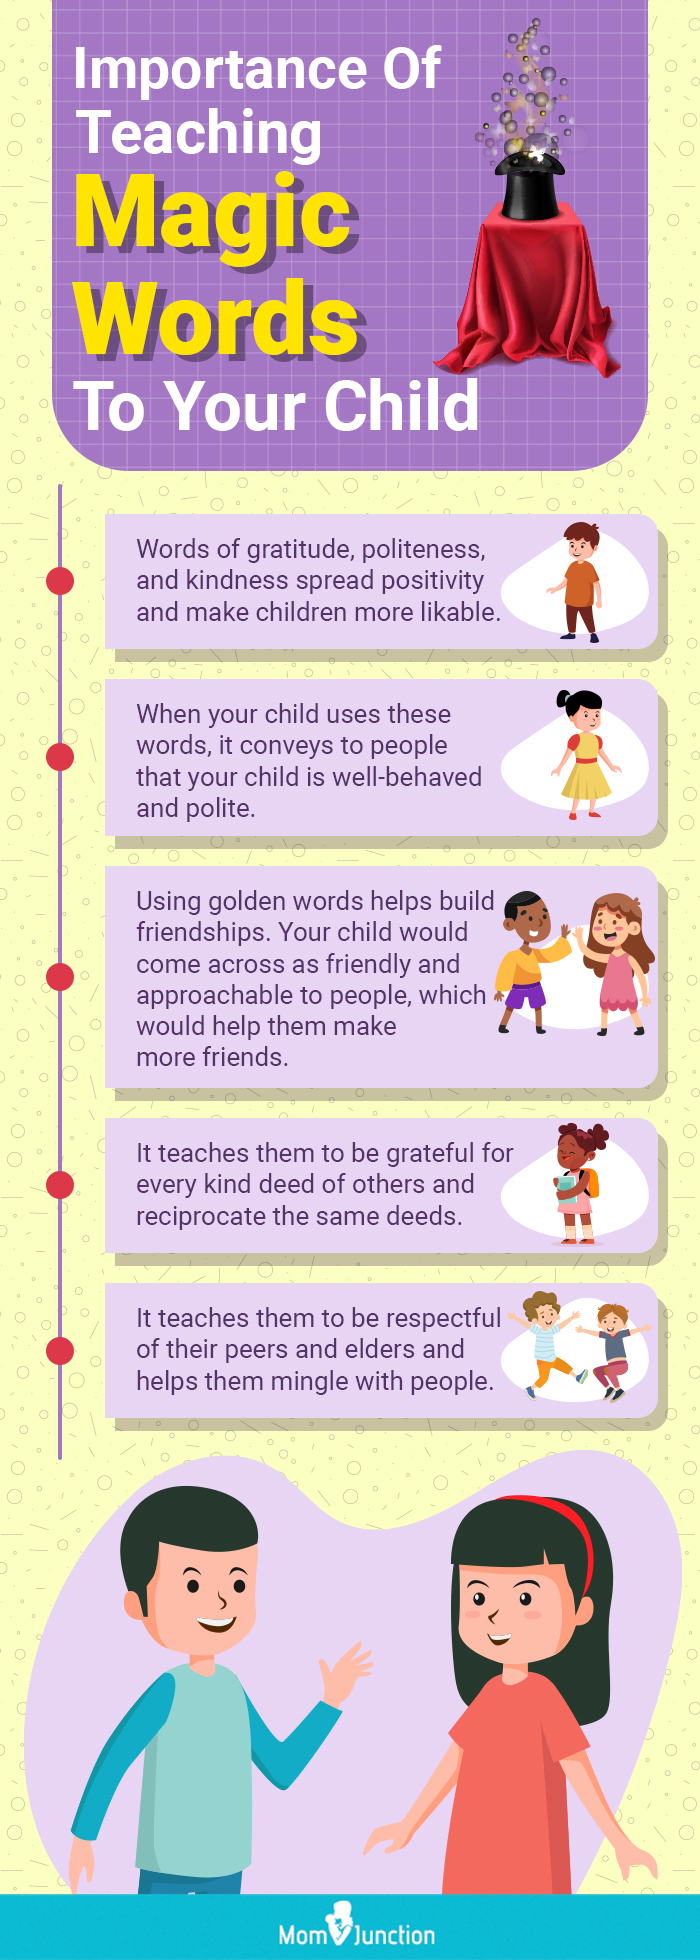 importance of teaching magic words to your child (infographic)